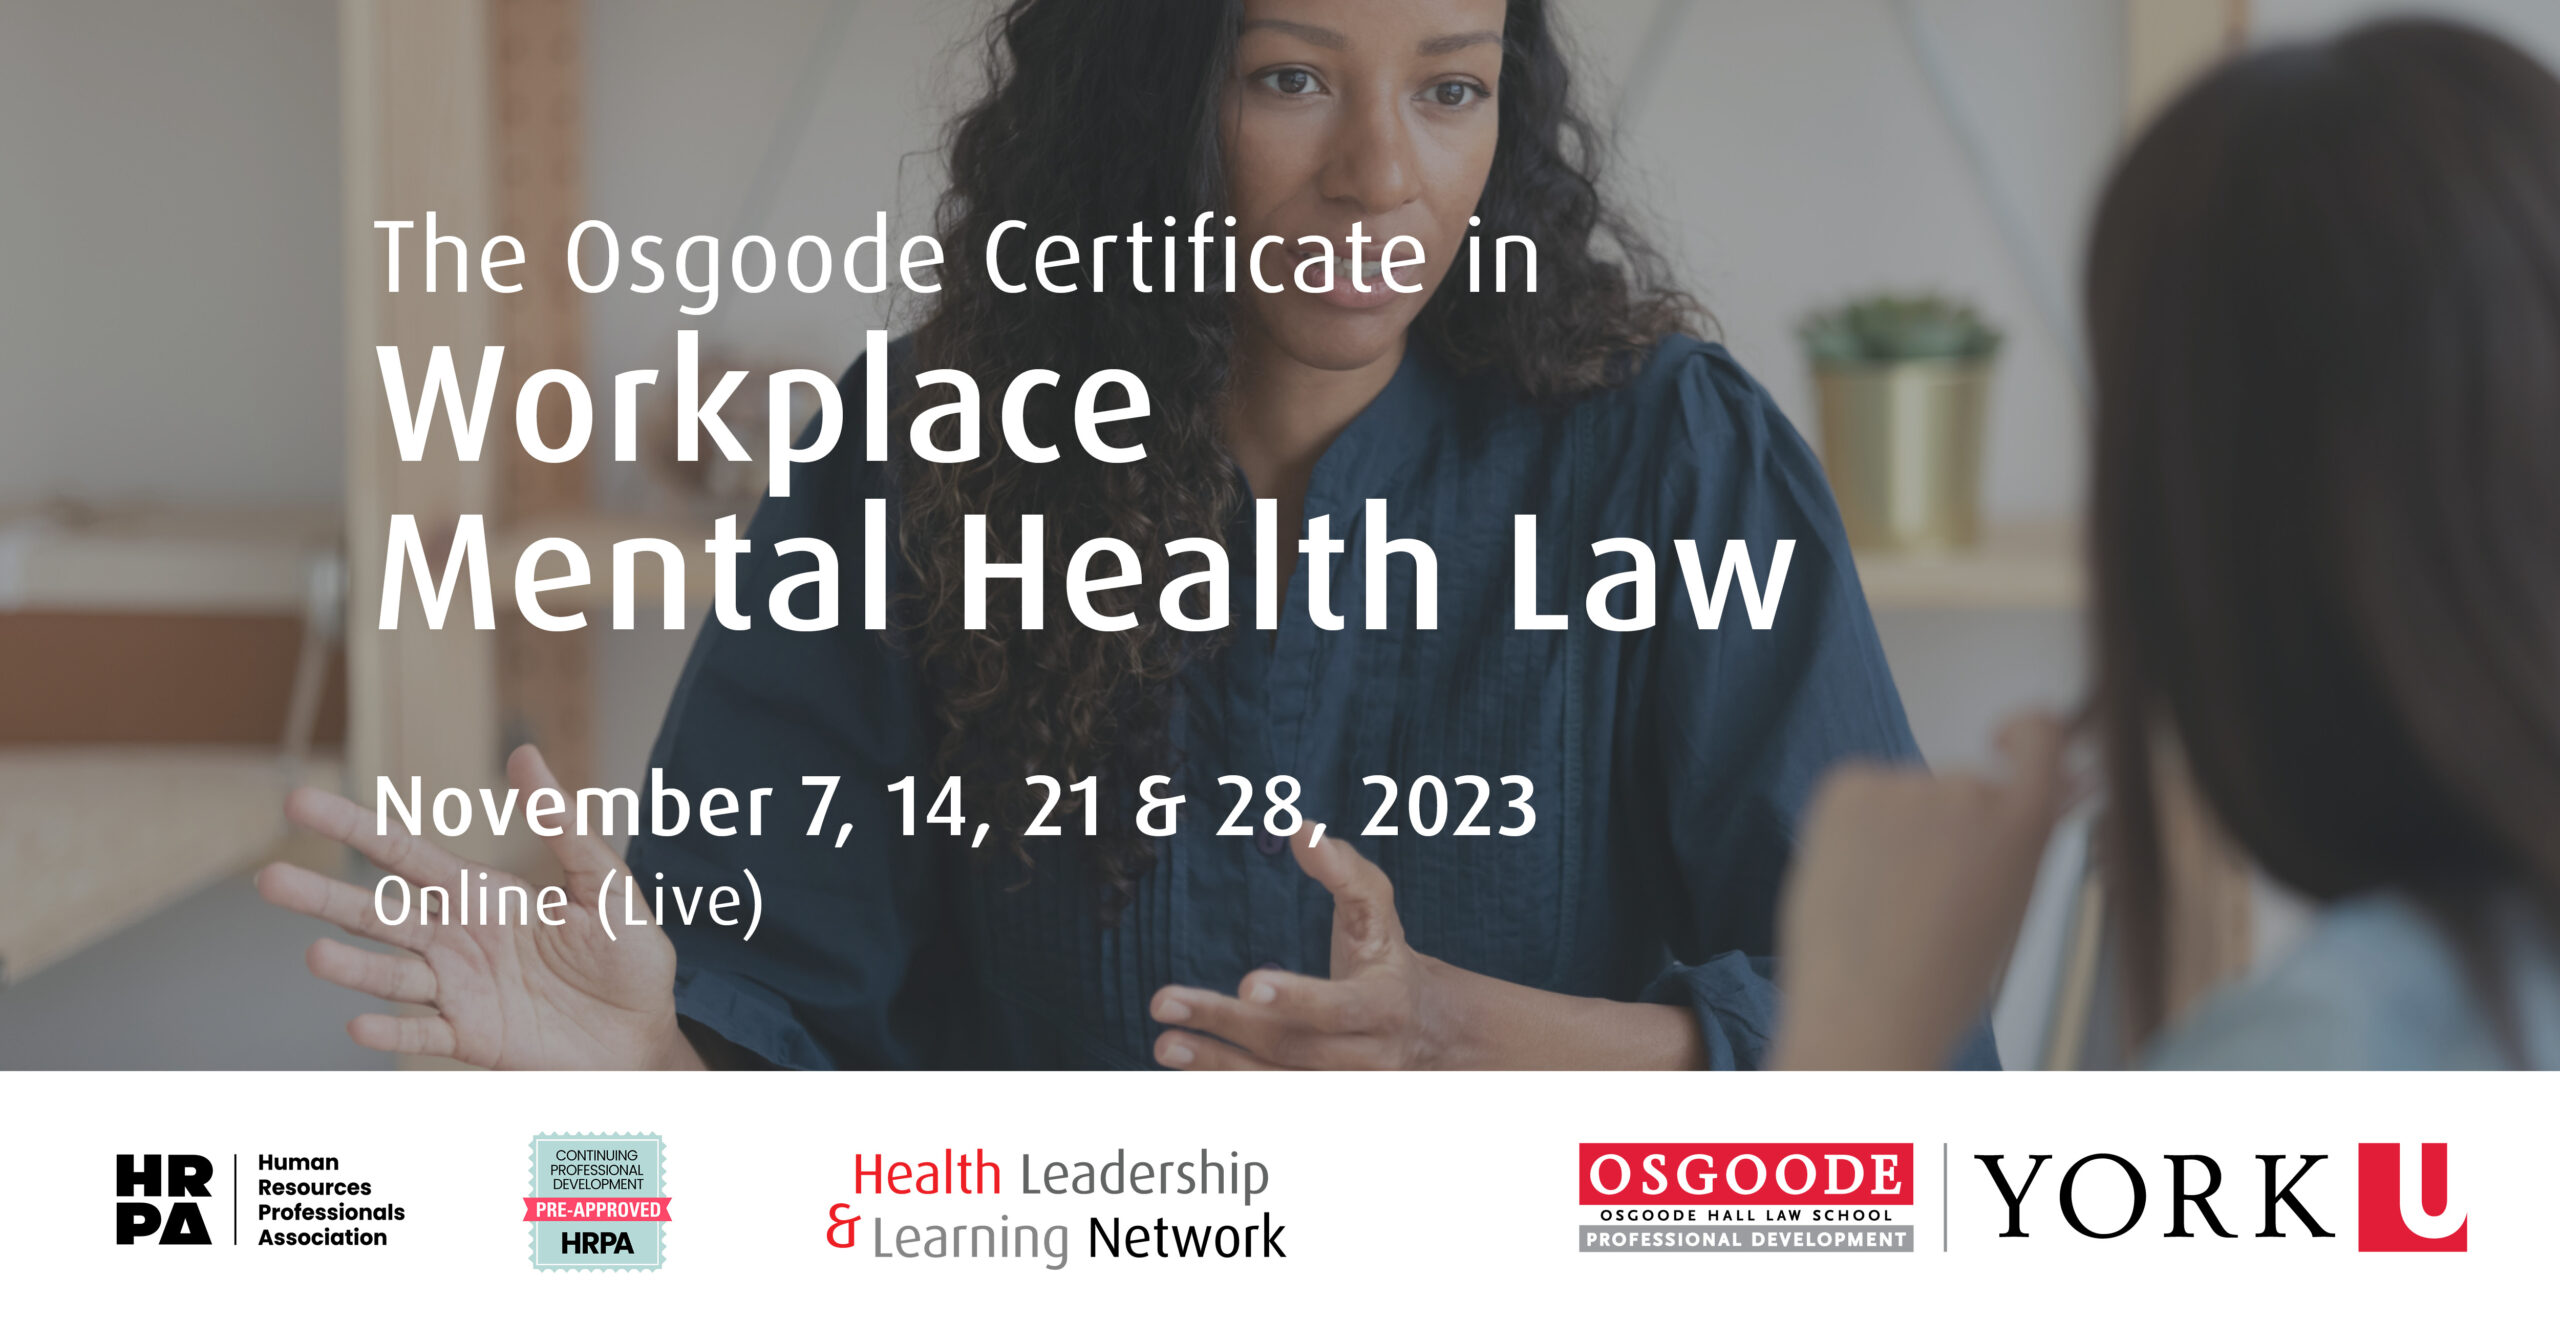 The Osgoode Certificate in Workplace Mental Health Law